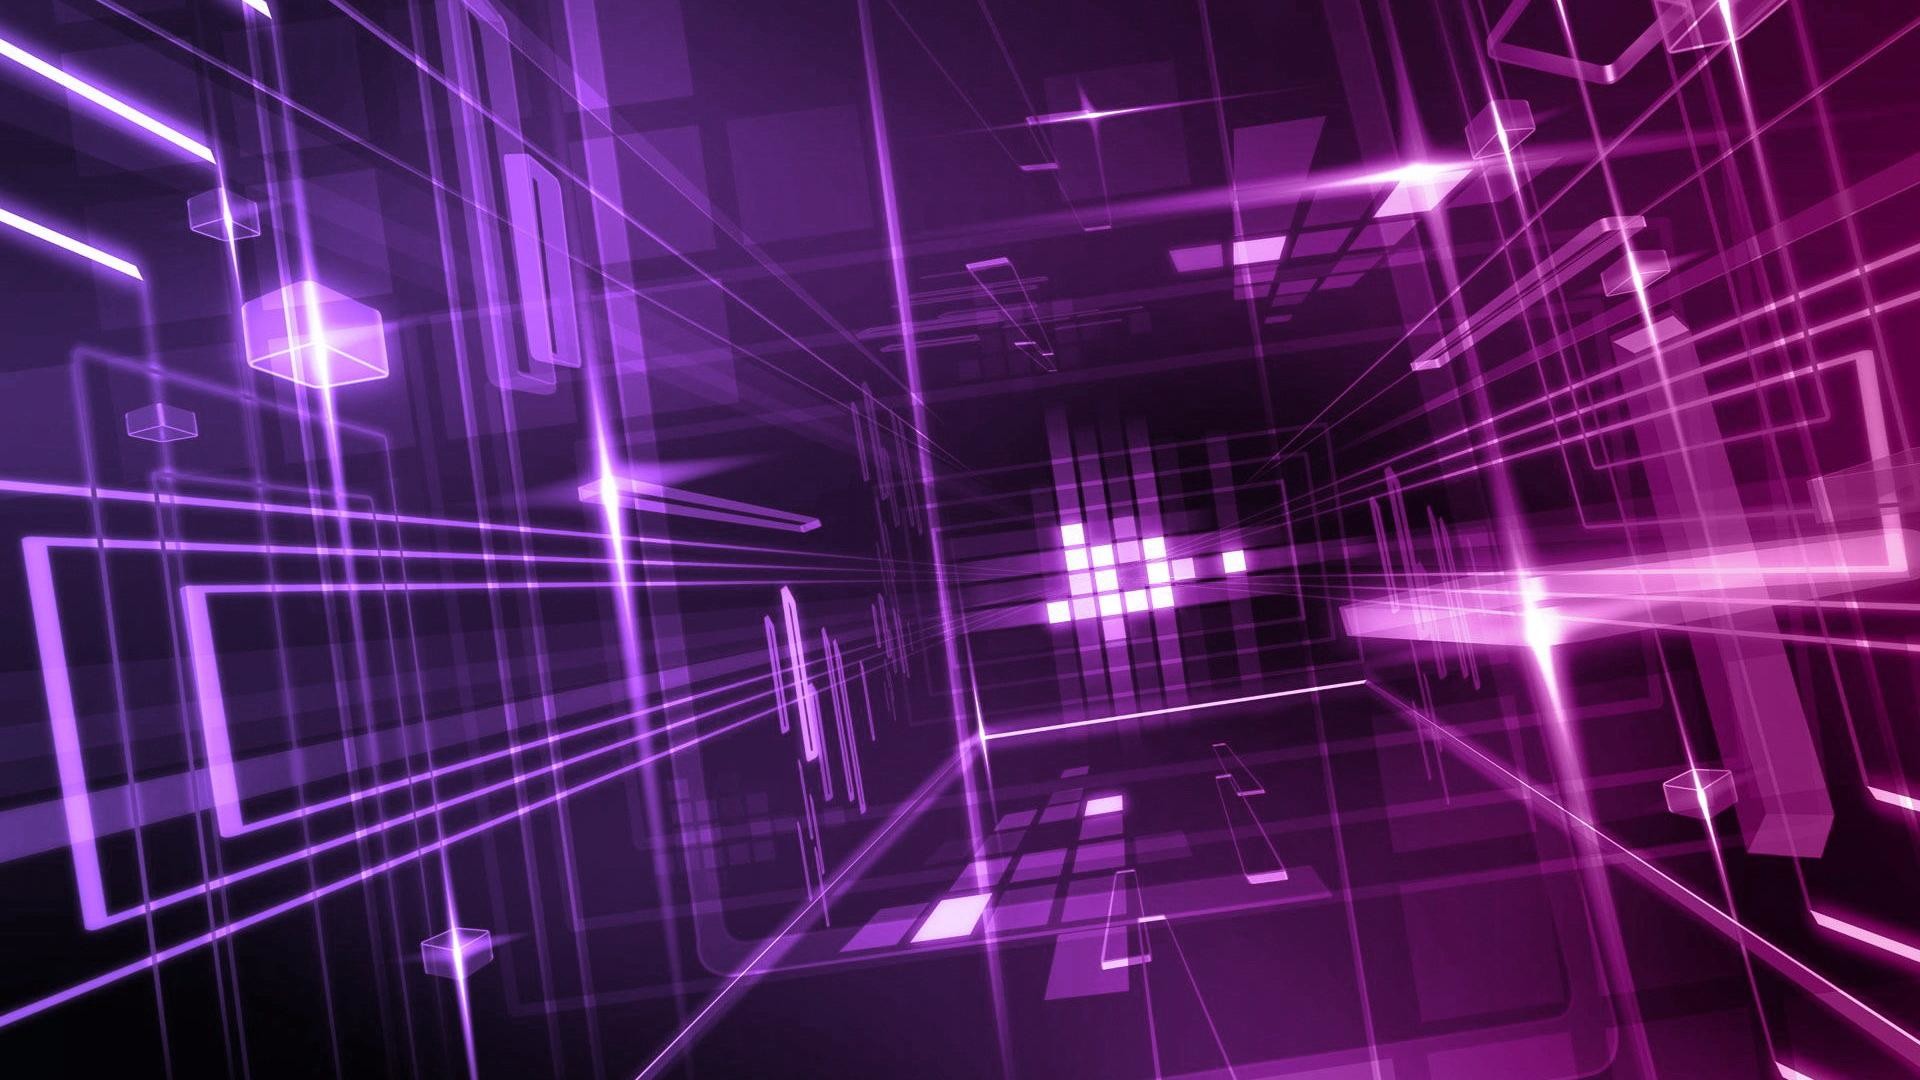 Pink And Purple Design 3d Image Hd Wallpapers Buzz. architecture ideas. vacation house plans